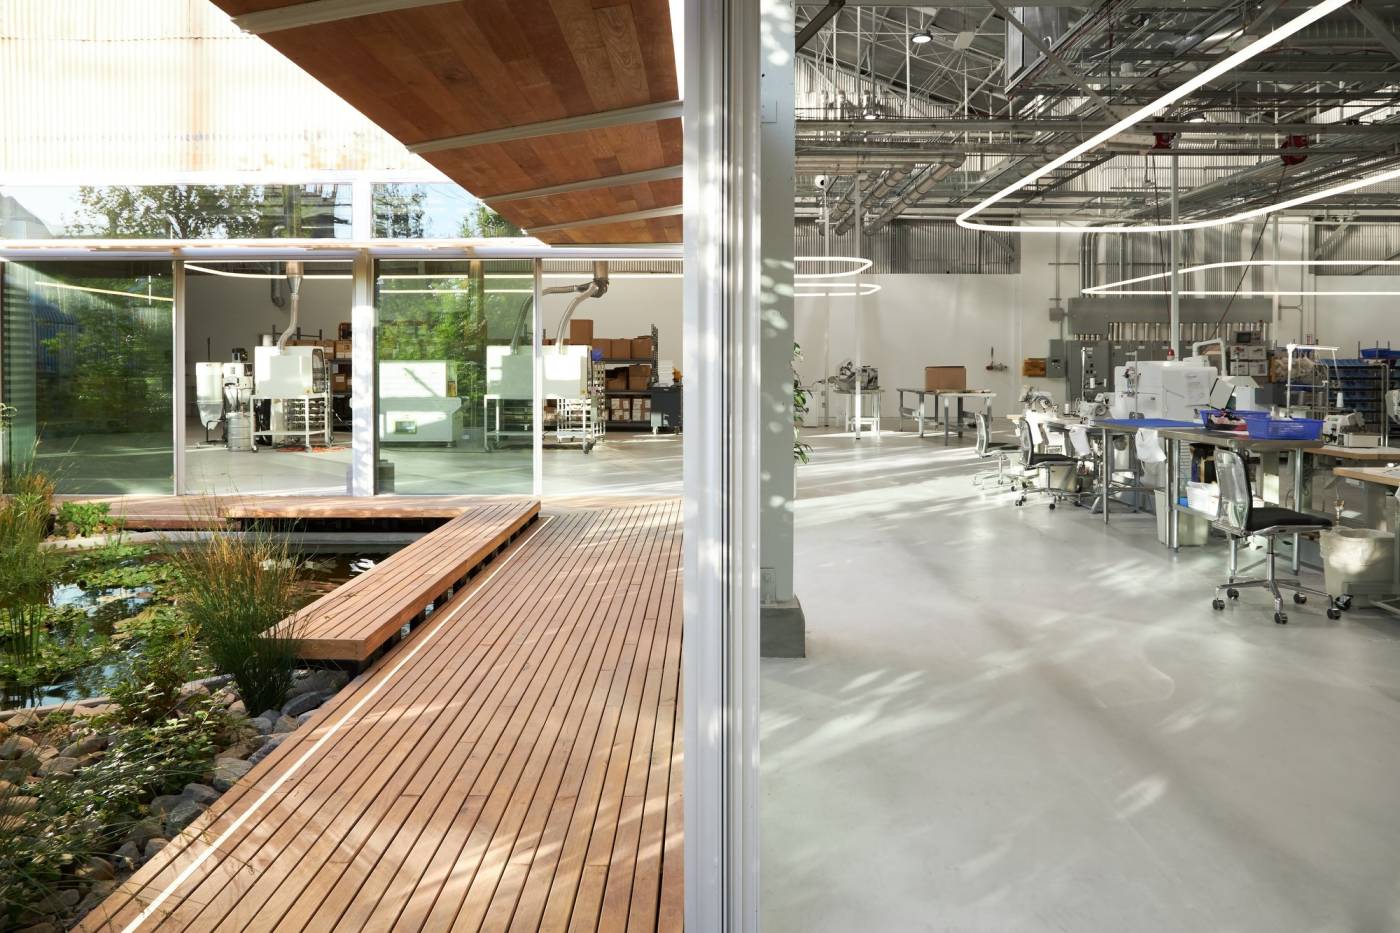 Set within an industrial Los Angeles neighborhood, KX Lab shrouds its unconventional tech-filled design within a typical warehouse exterior and sets out to change the way manufacturing is carried out in Los Angeles. The design focus supports a social mission where technology and people interconnect. 
<br><br>
The facility seamlessly merges a knit manufacturing space with workspace, research and development, retail environment, and exhibition space. KX Lab sees its new home as a prototype for “radically more humane” manufacturing environments focused on sustainability and transparency. As a local manufacturer, KX Lab aims to bring consumers, products, and the people that make them closer together.